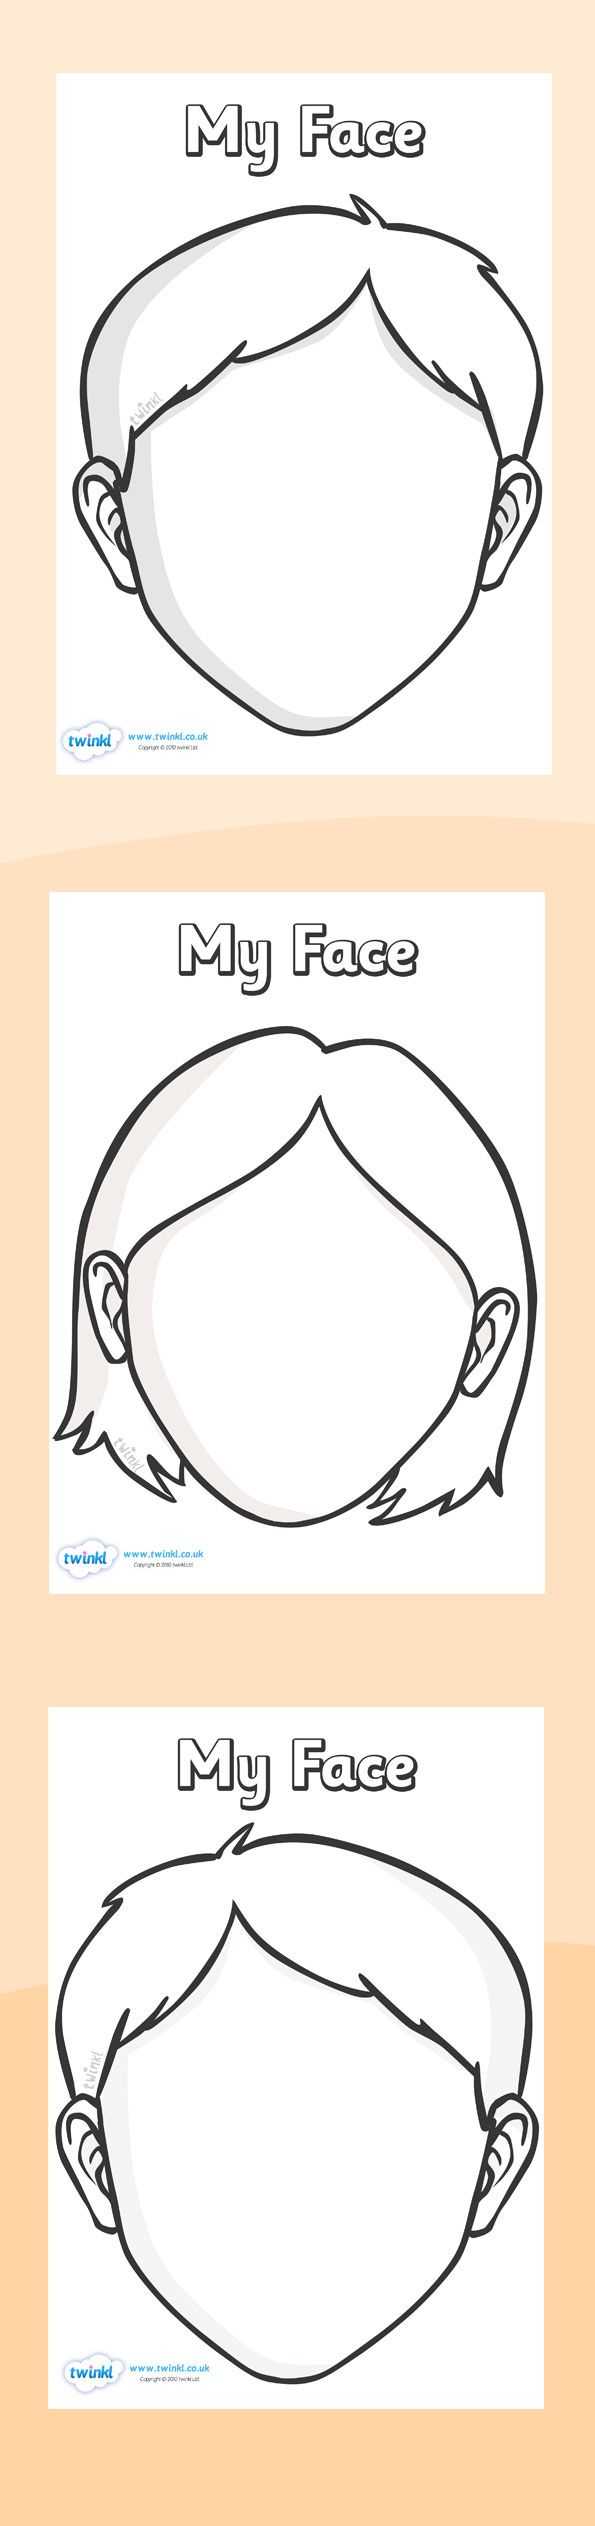 Twinkl Resources >> Blank Face Templates With Face Features Within Blank Face Template Preschool